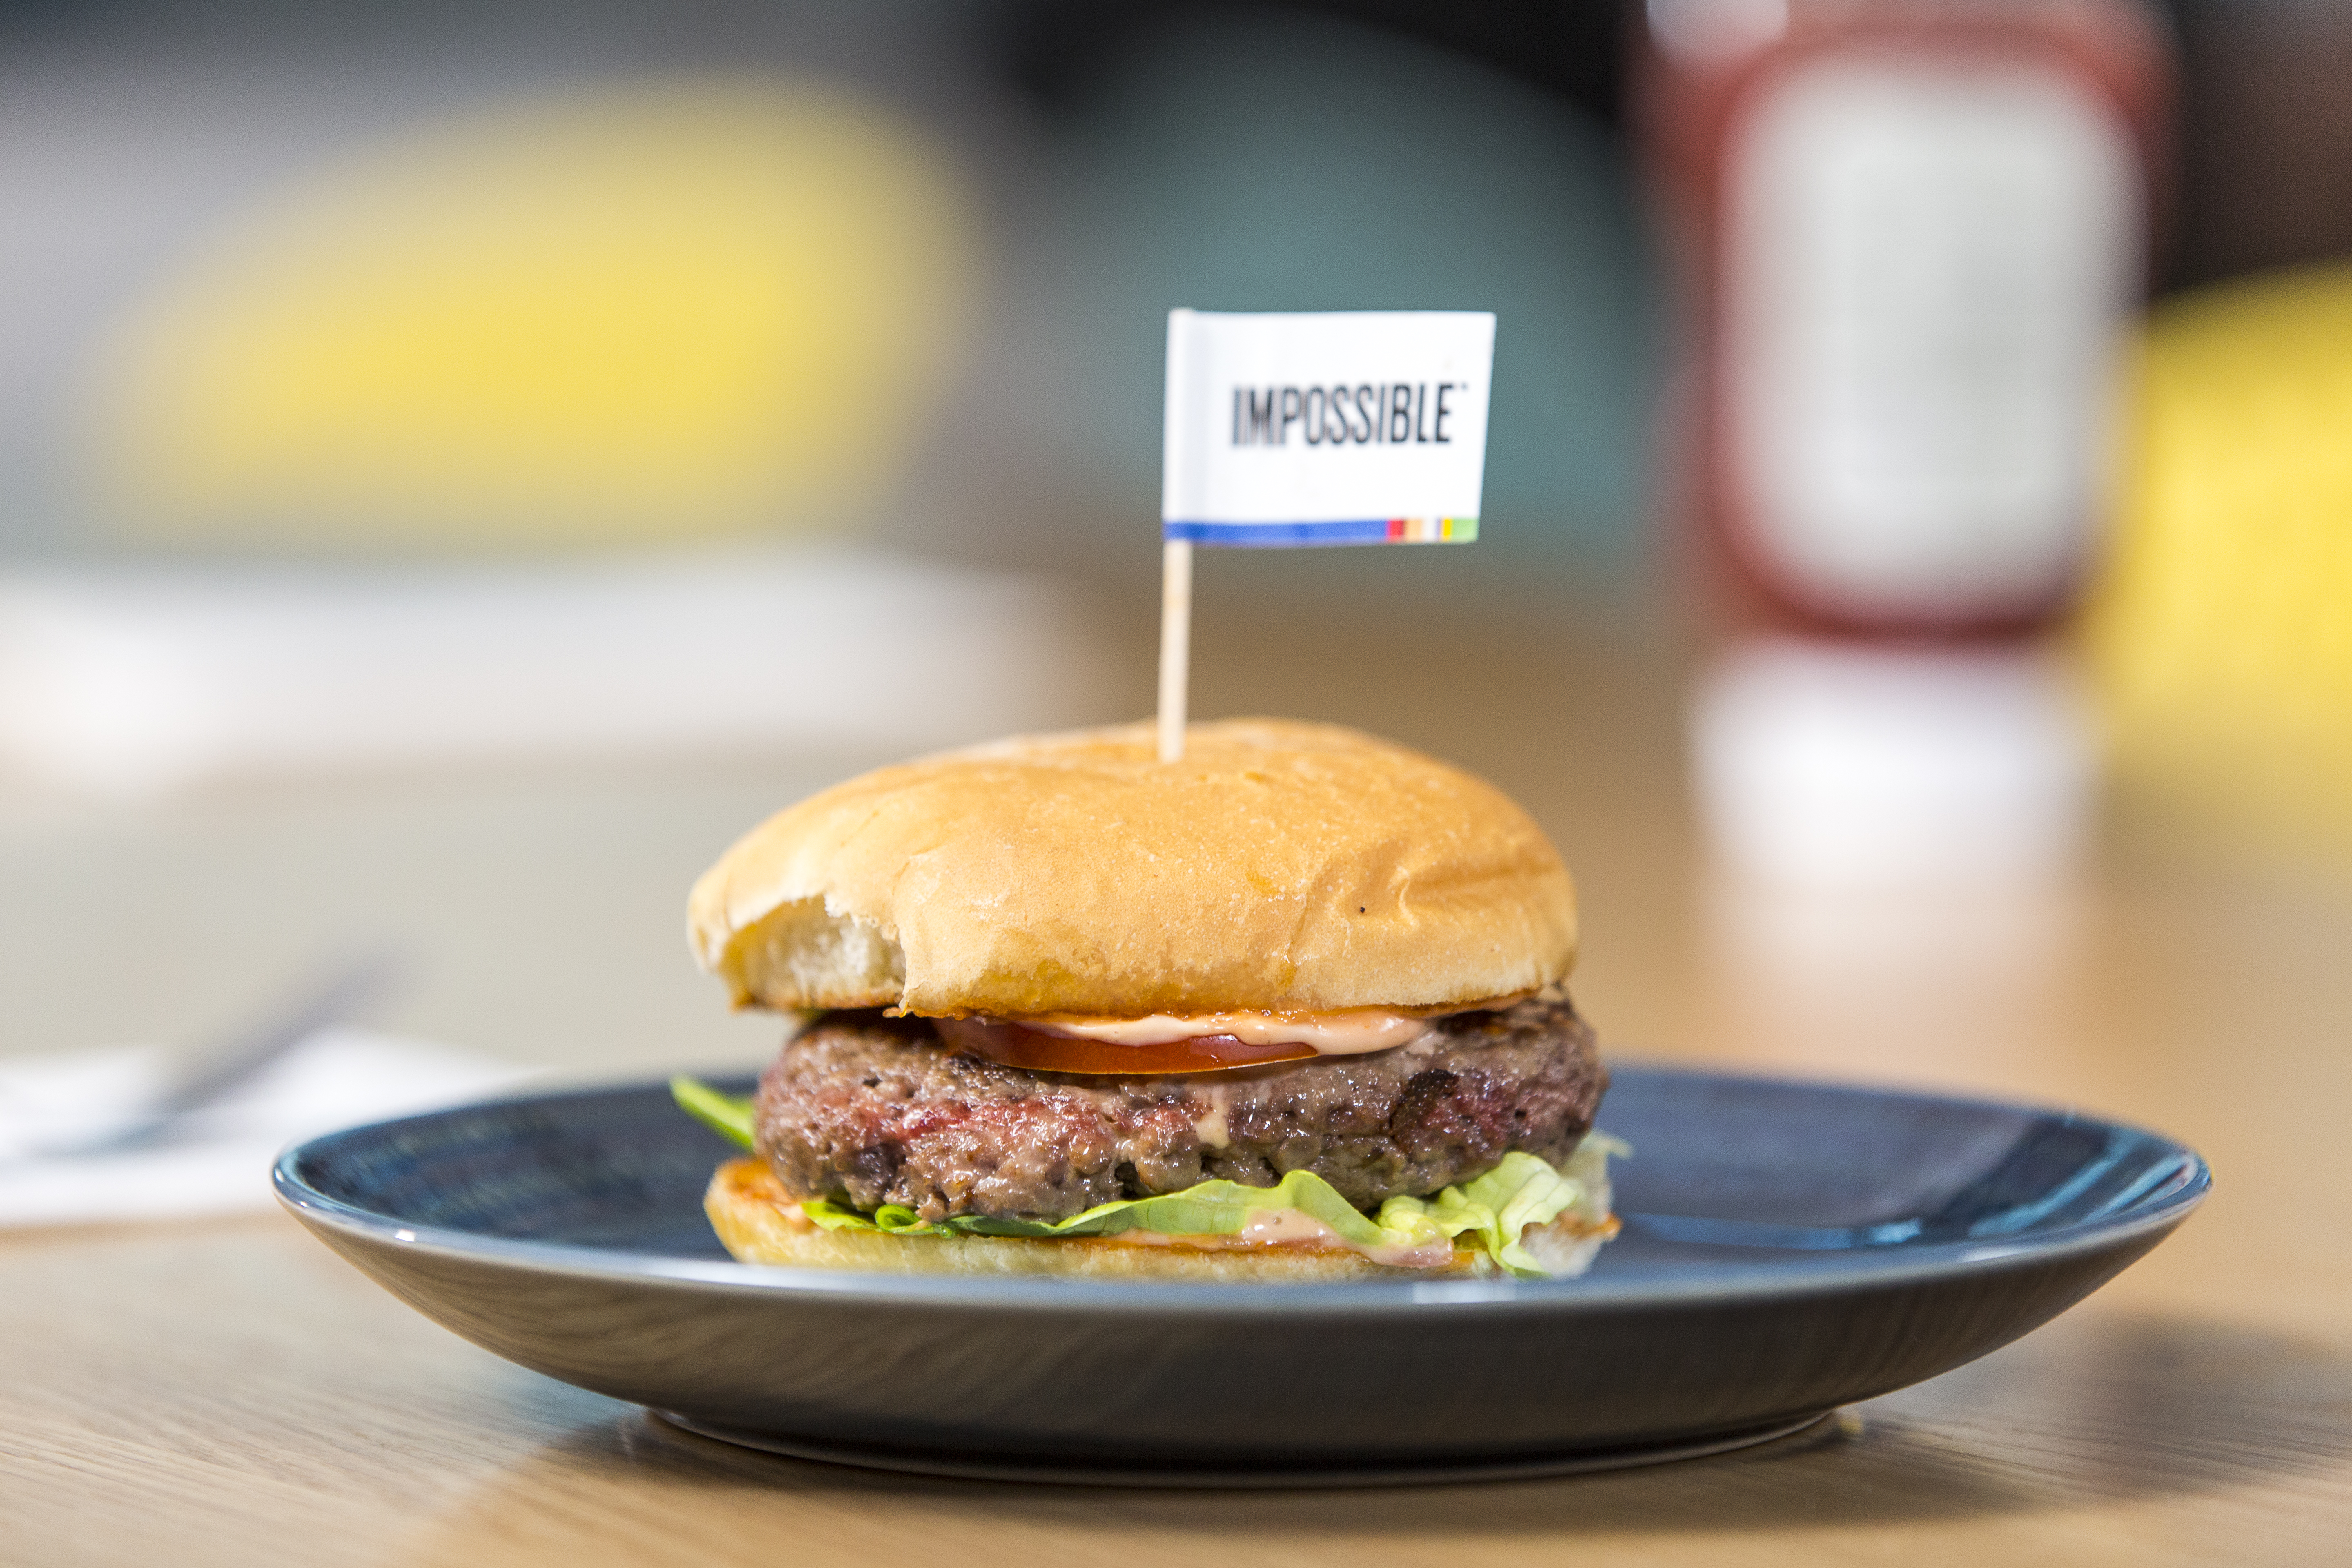 Burger on a plate with an “Impossible” flag in it.